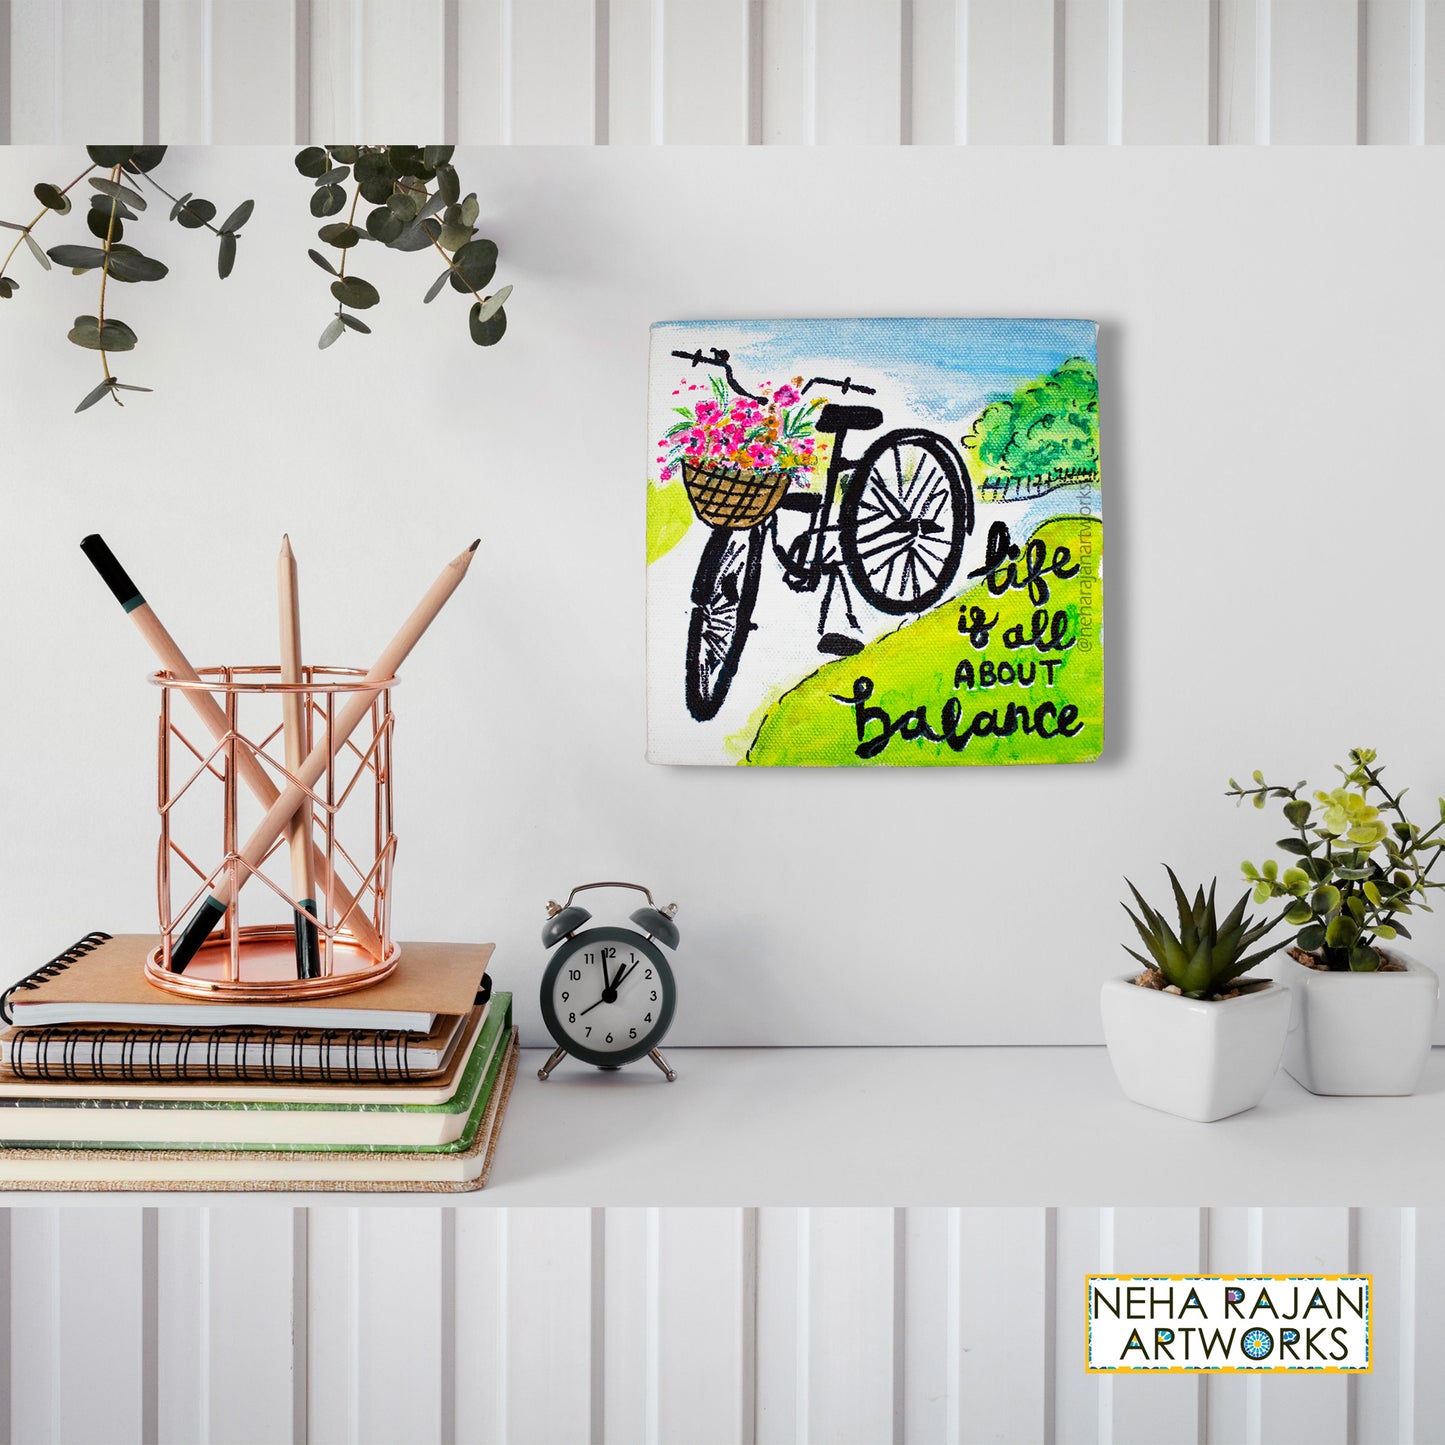 Neha Rajan Artworks Original Handmade Bicycle Floral Motivational Quote Painting Hand Painted On Canvas Frame 6*6